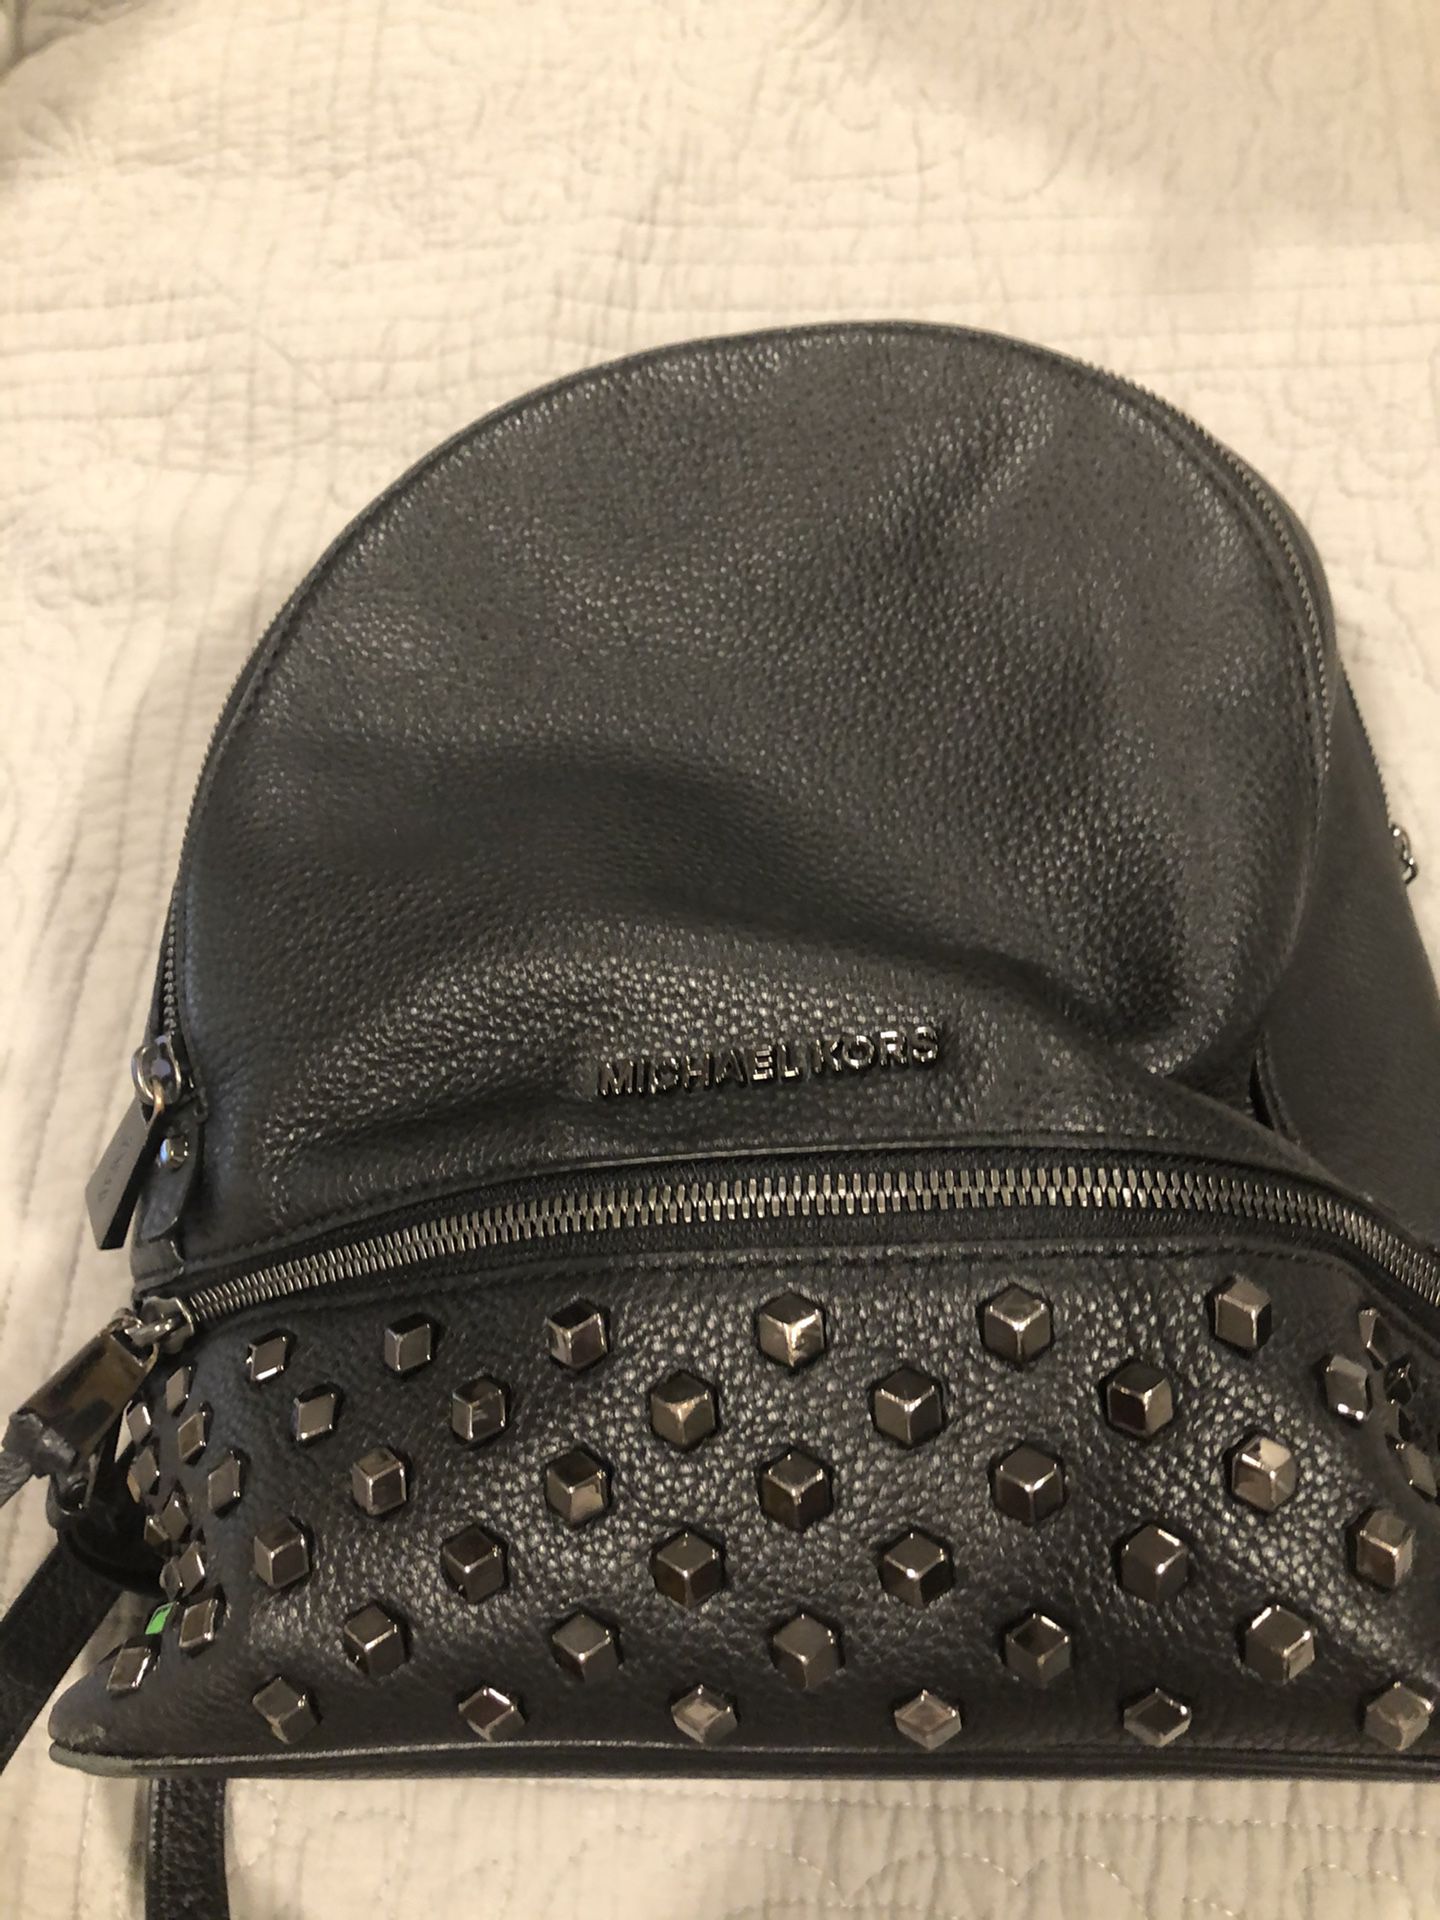 Michael Kors backpack with multiple compartments in gread condition with beaded studs. .